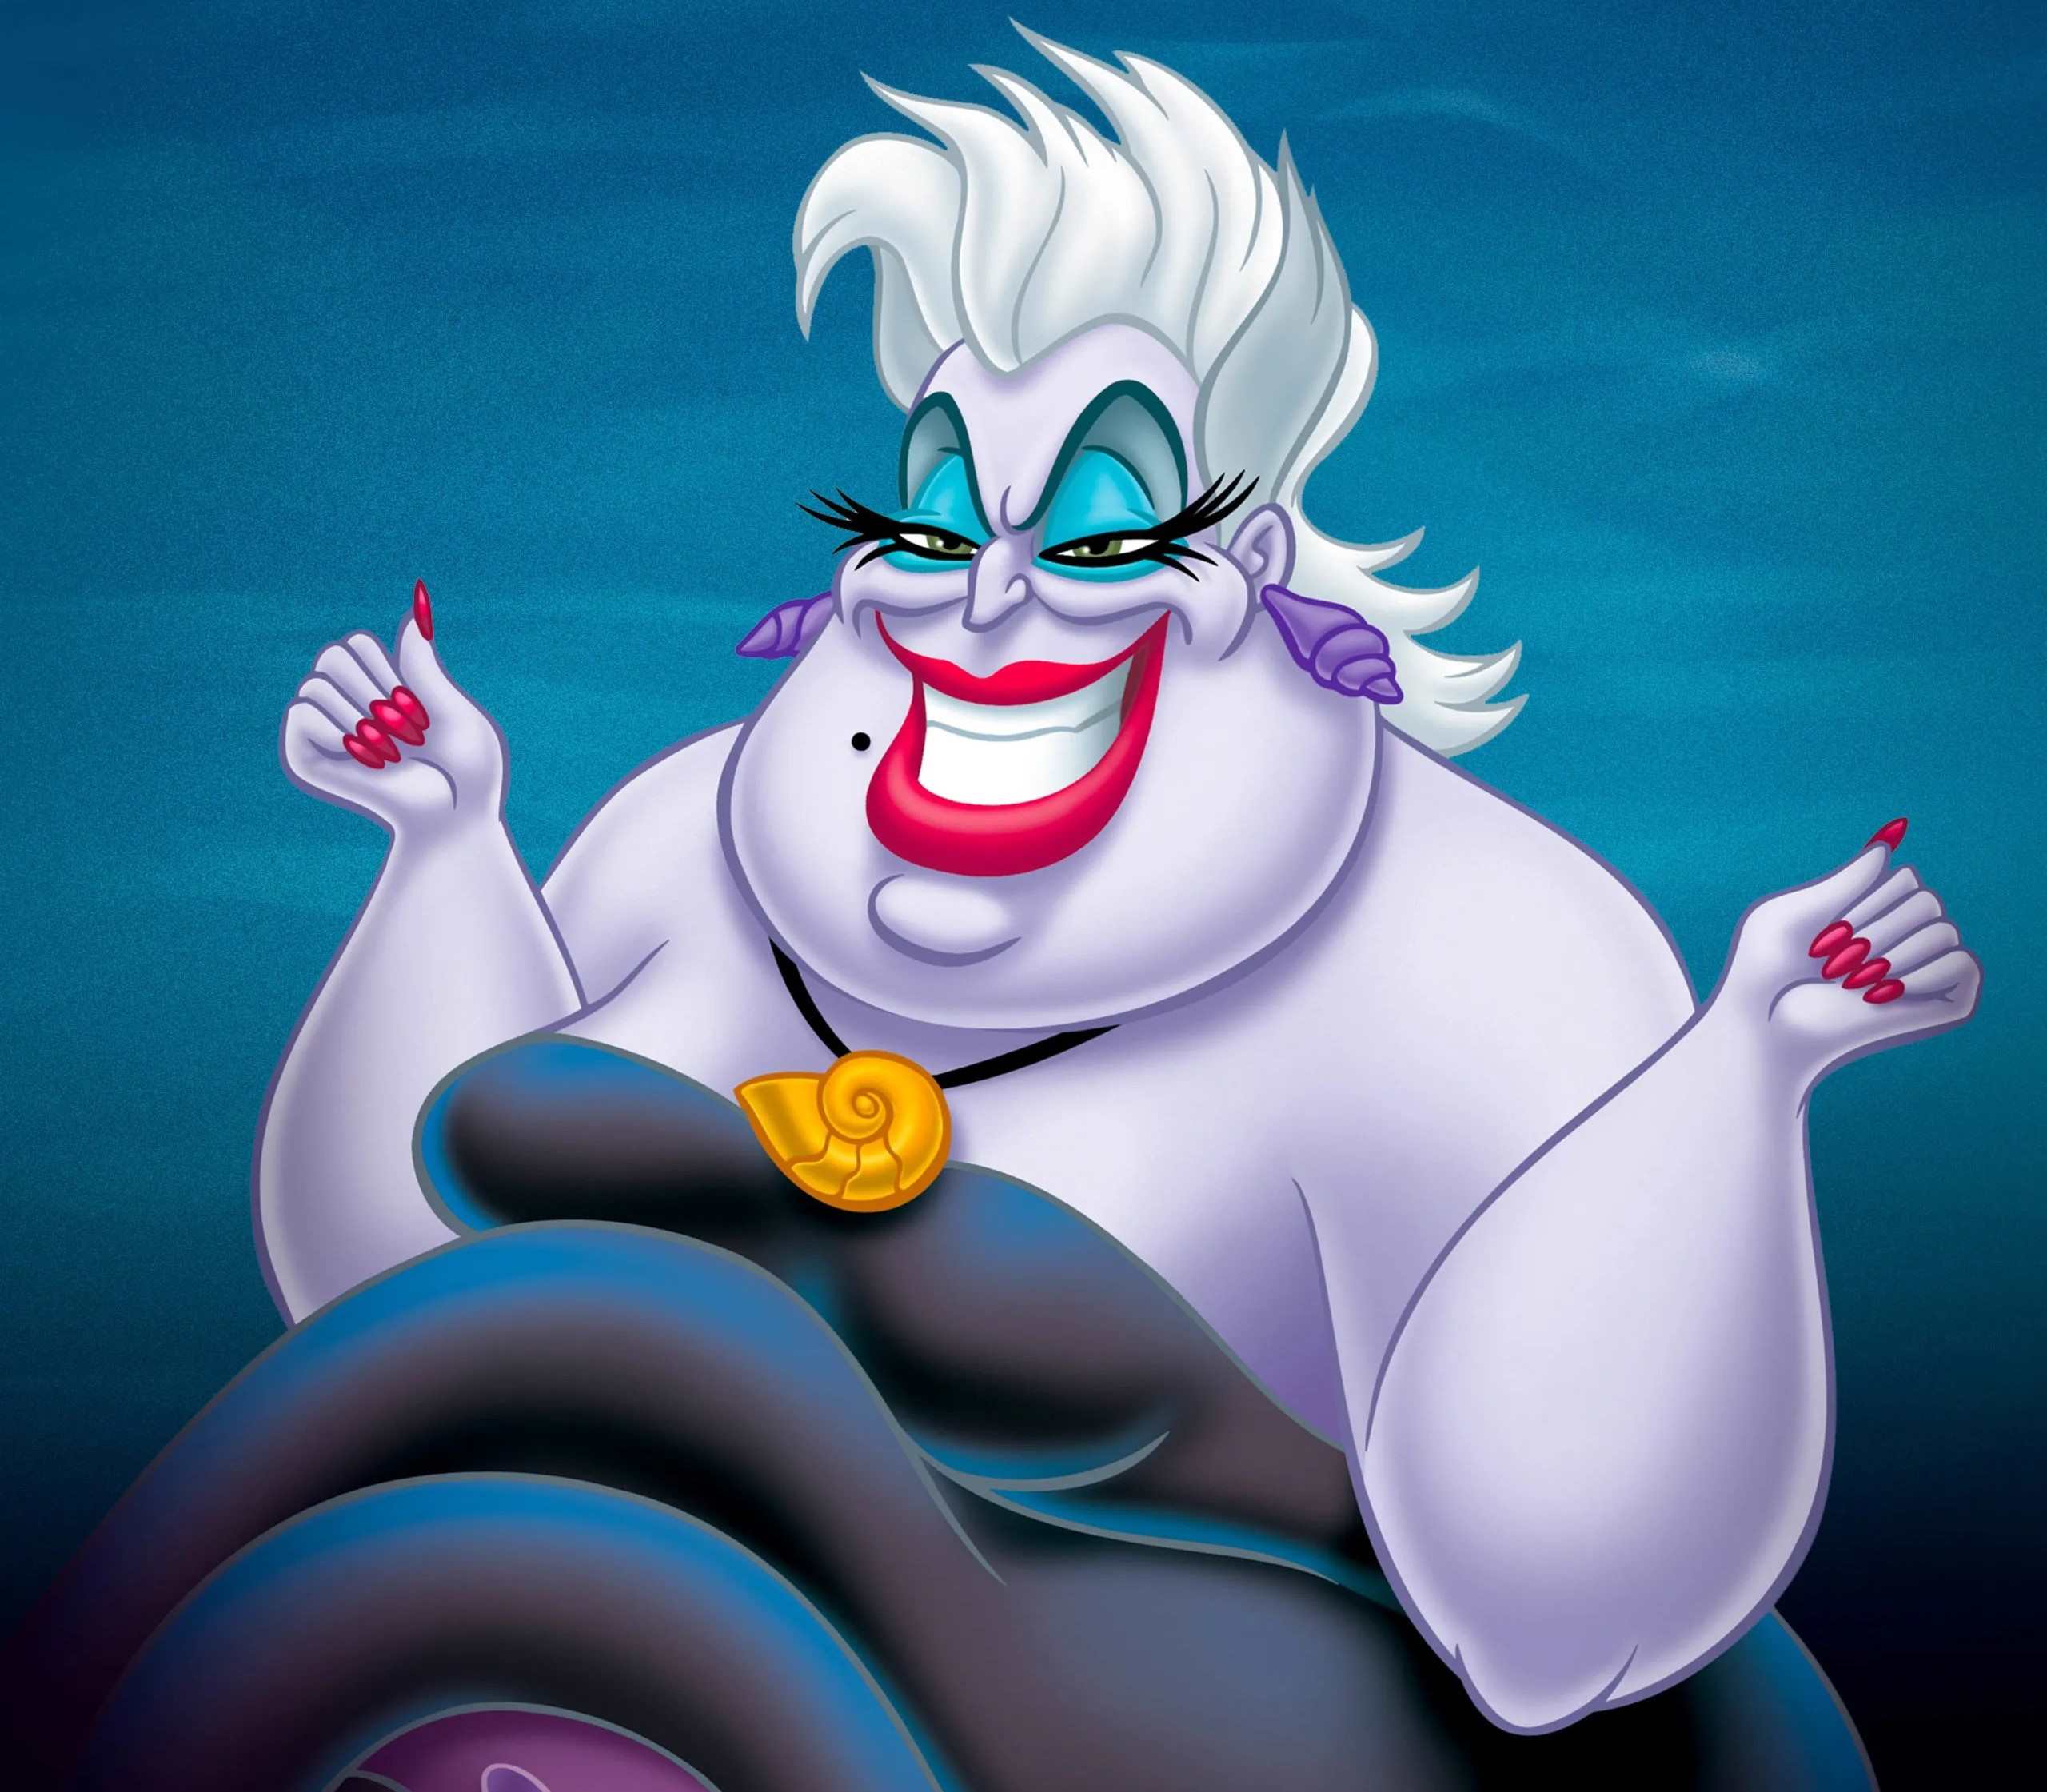 23 Facts About Ursula (The Little Mermaid) 